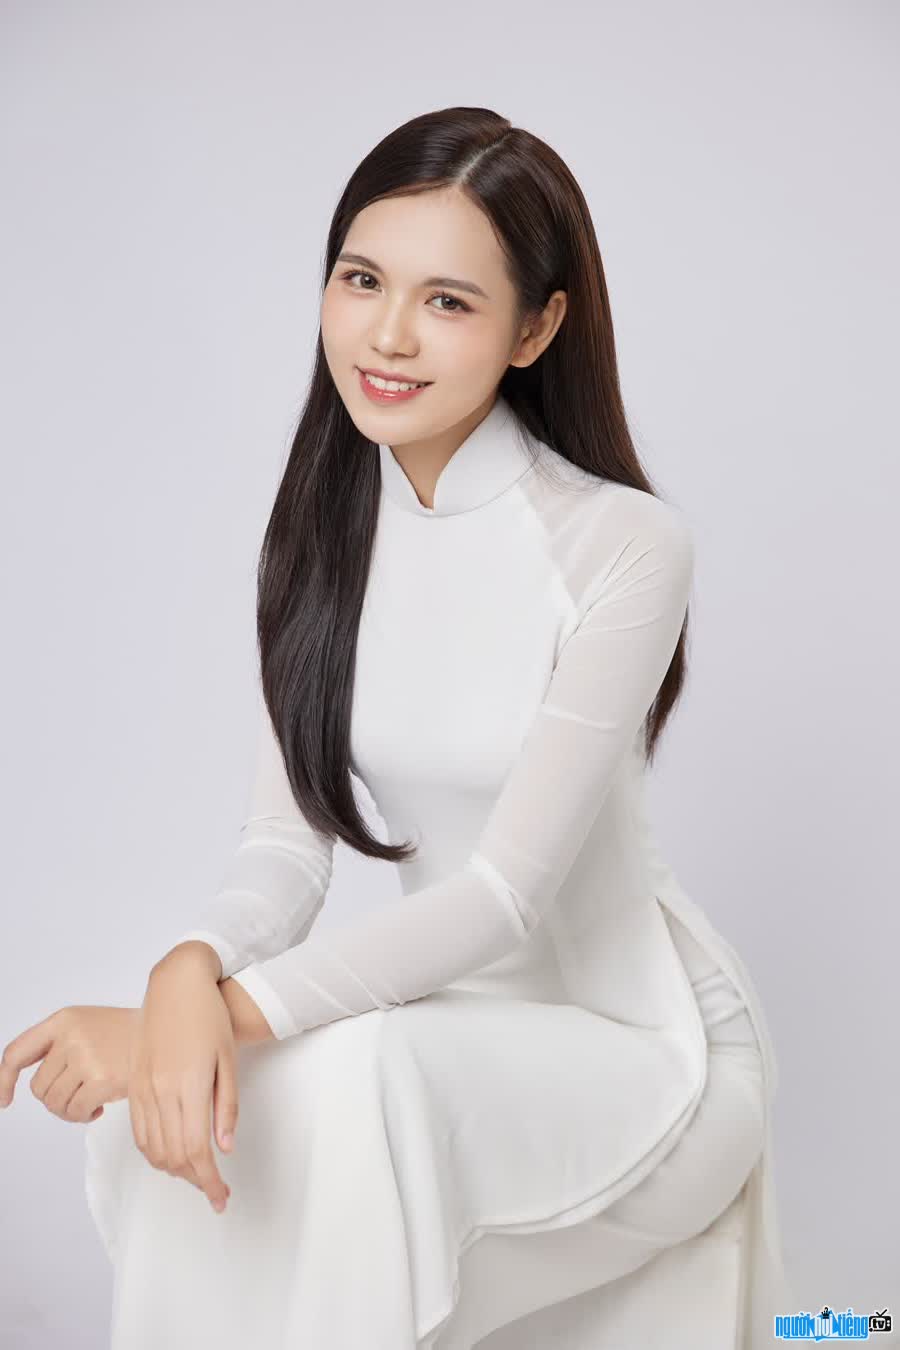 Miss Luong Ky Duyen is currently a student at the Academy of Journalism and Propaganda